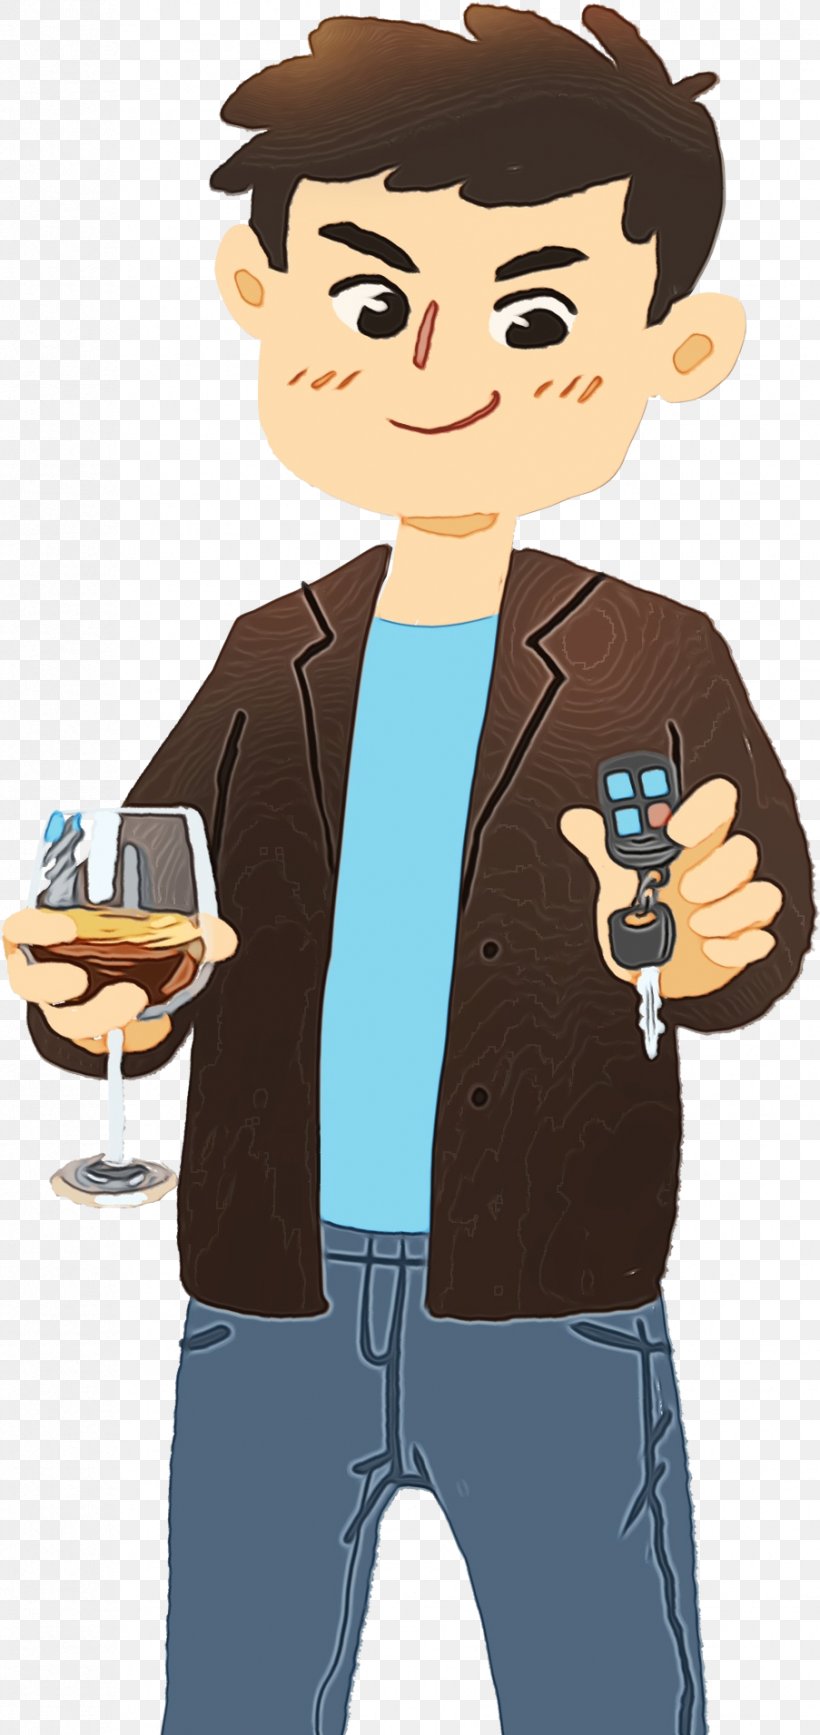 Cartoon Drink Alcohol Drinking Bartender, PNG, 903x1911px, Watercolor, Alcohol, Bartender, Cartoon, Drink Download Free